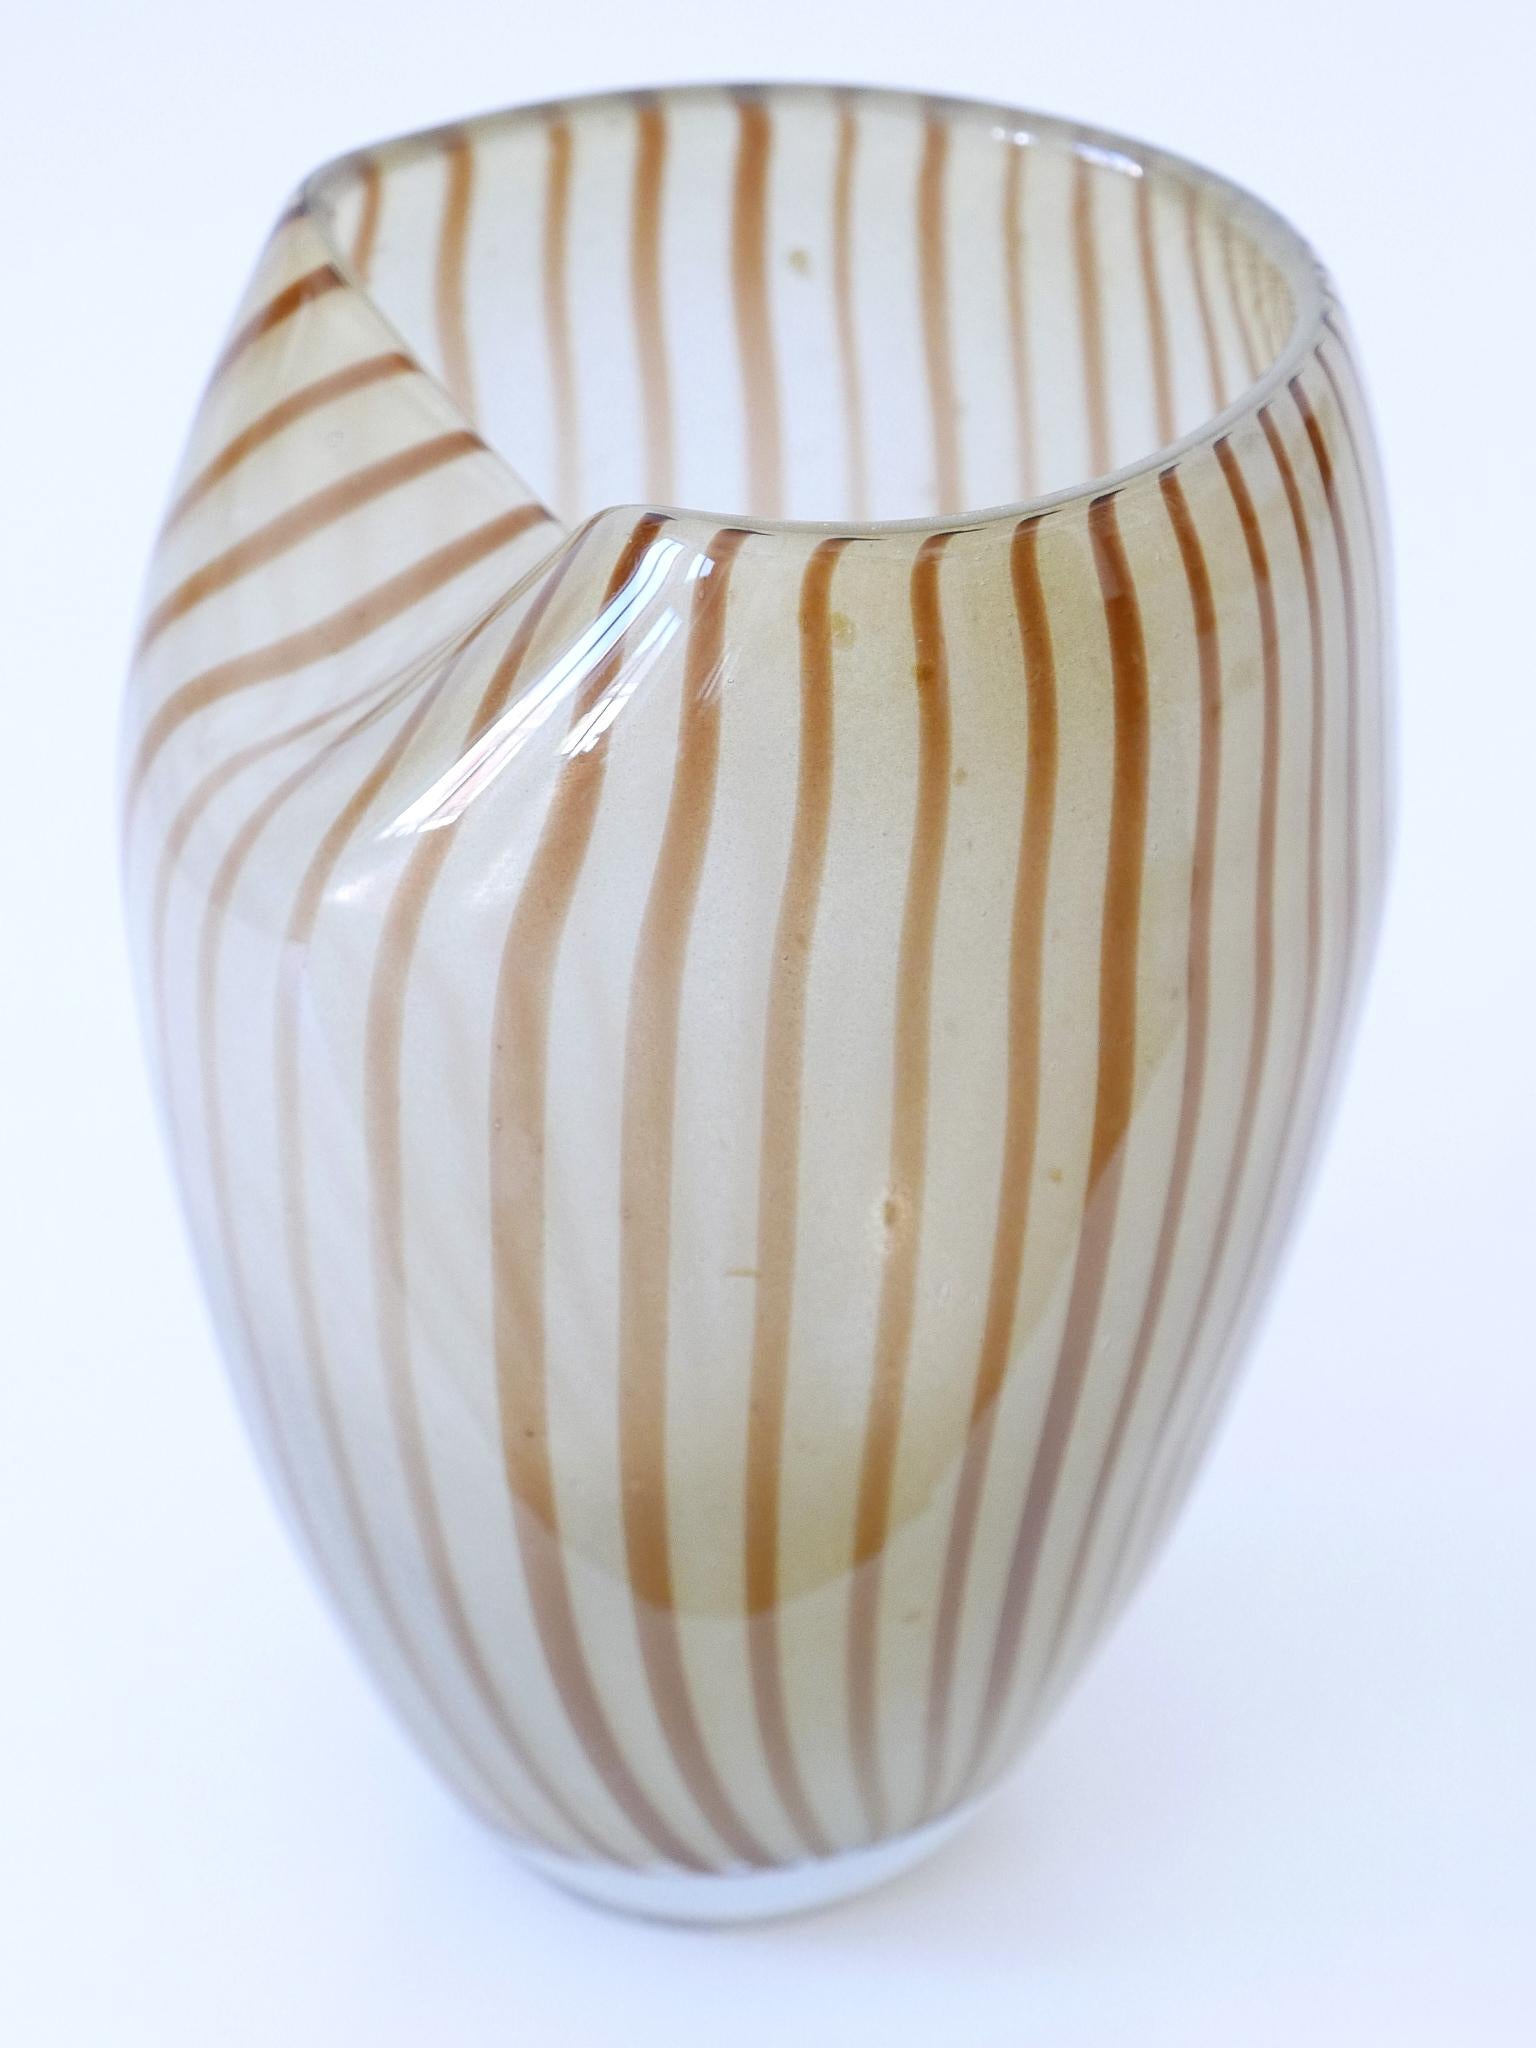 Decorative Mid Century Modern Murano Glass Vase Italy 1960s  For Sale 4